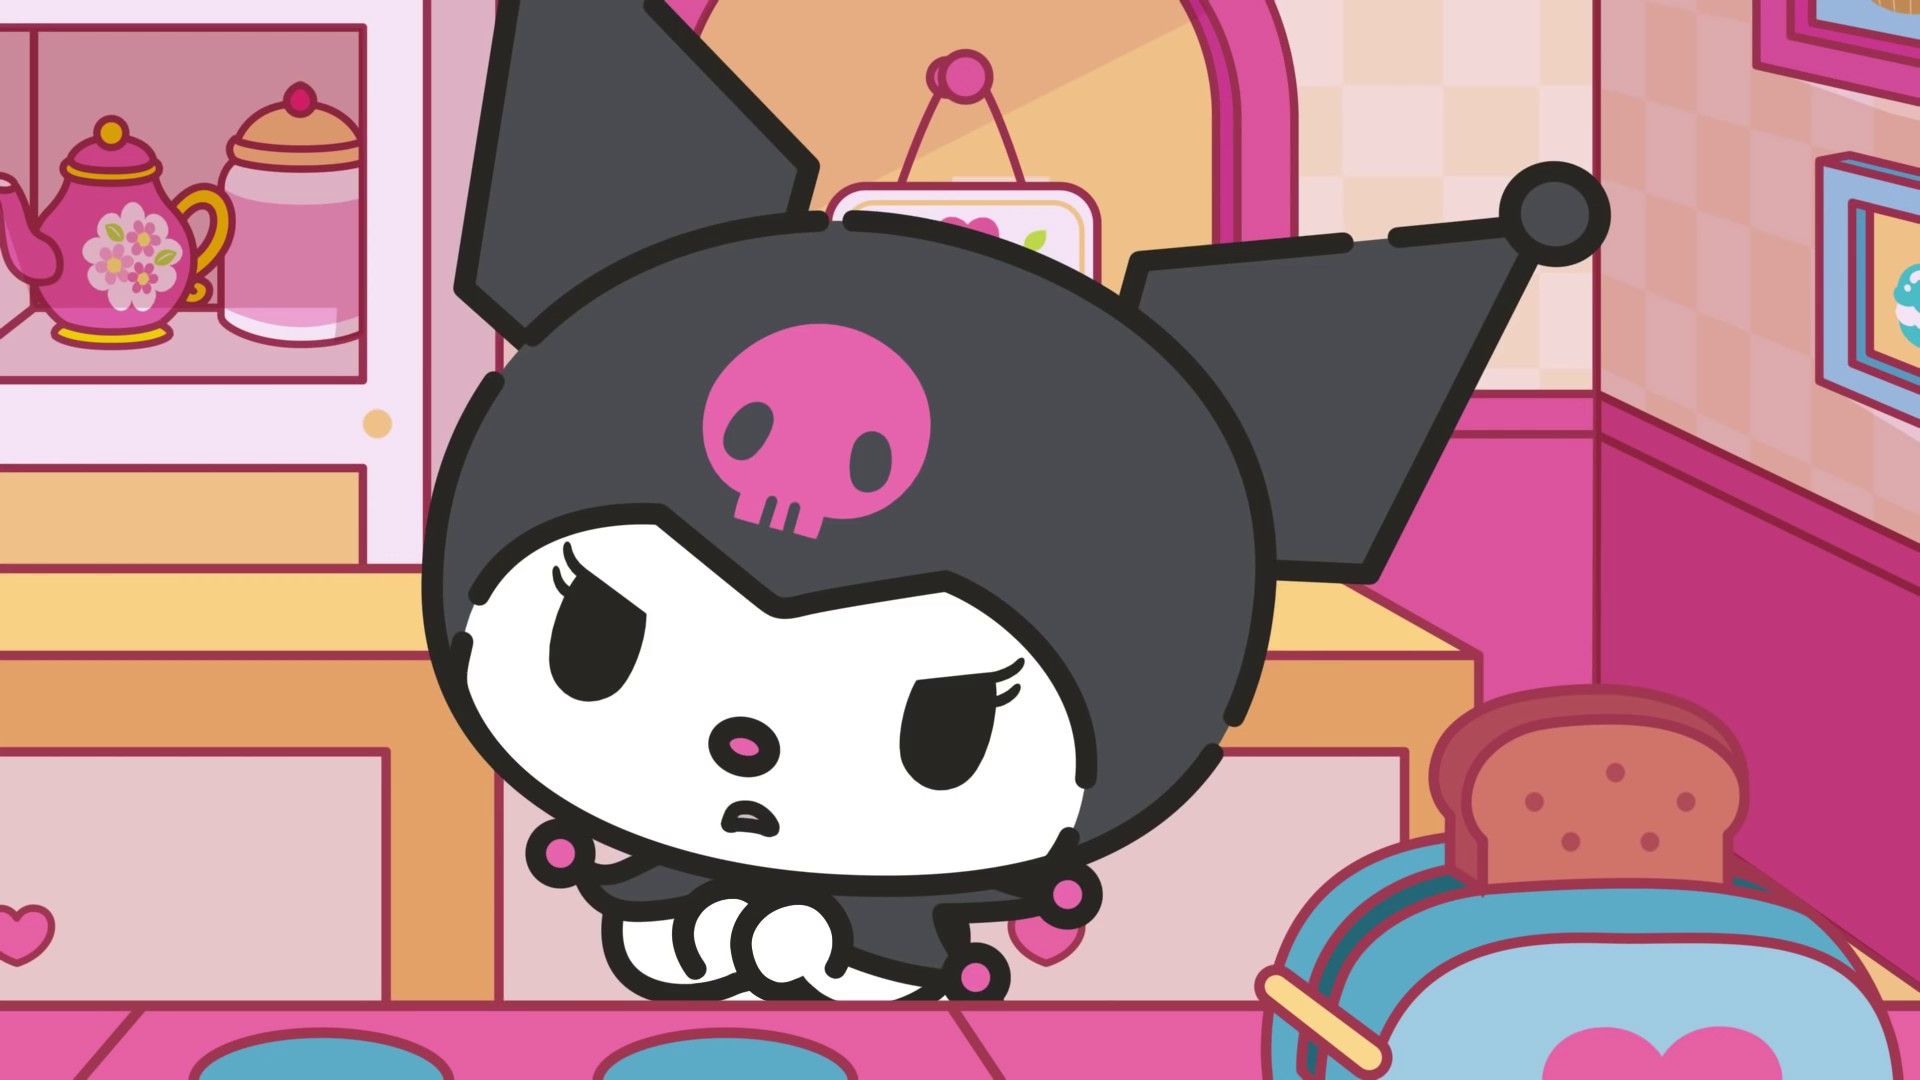 Kuromi is a character from the Sanrio company. She is a black cat with white fur on her belly and paws. She has a pink skull on her head and wears a black pointed hat. She is sitting on a table and looking down. - Sanrio